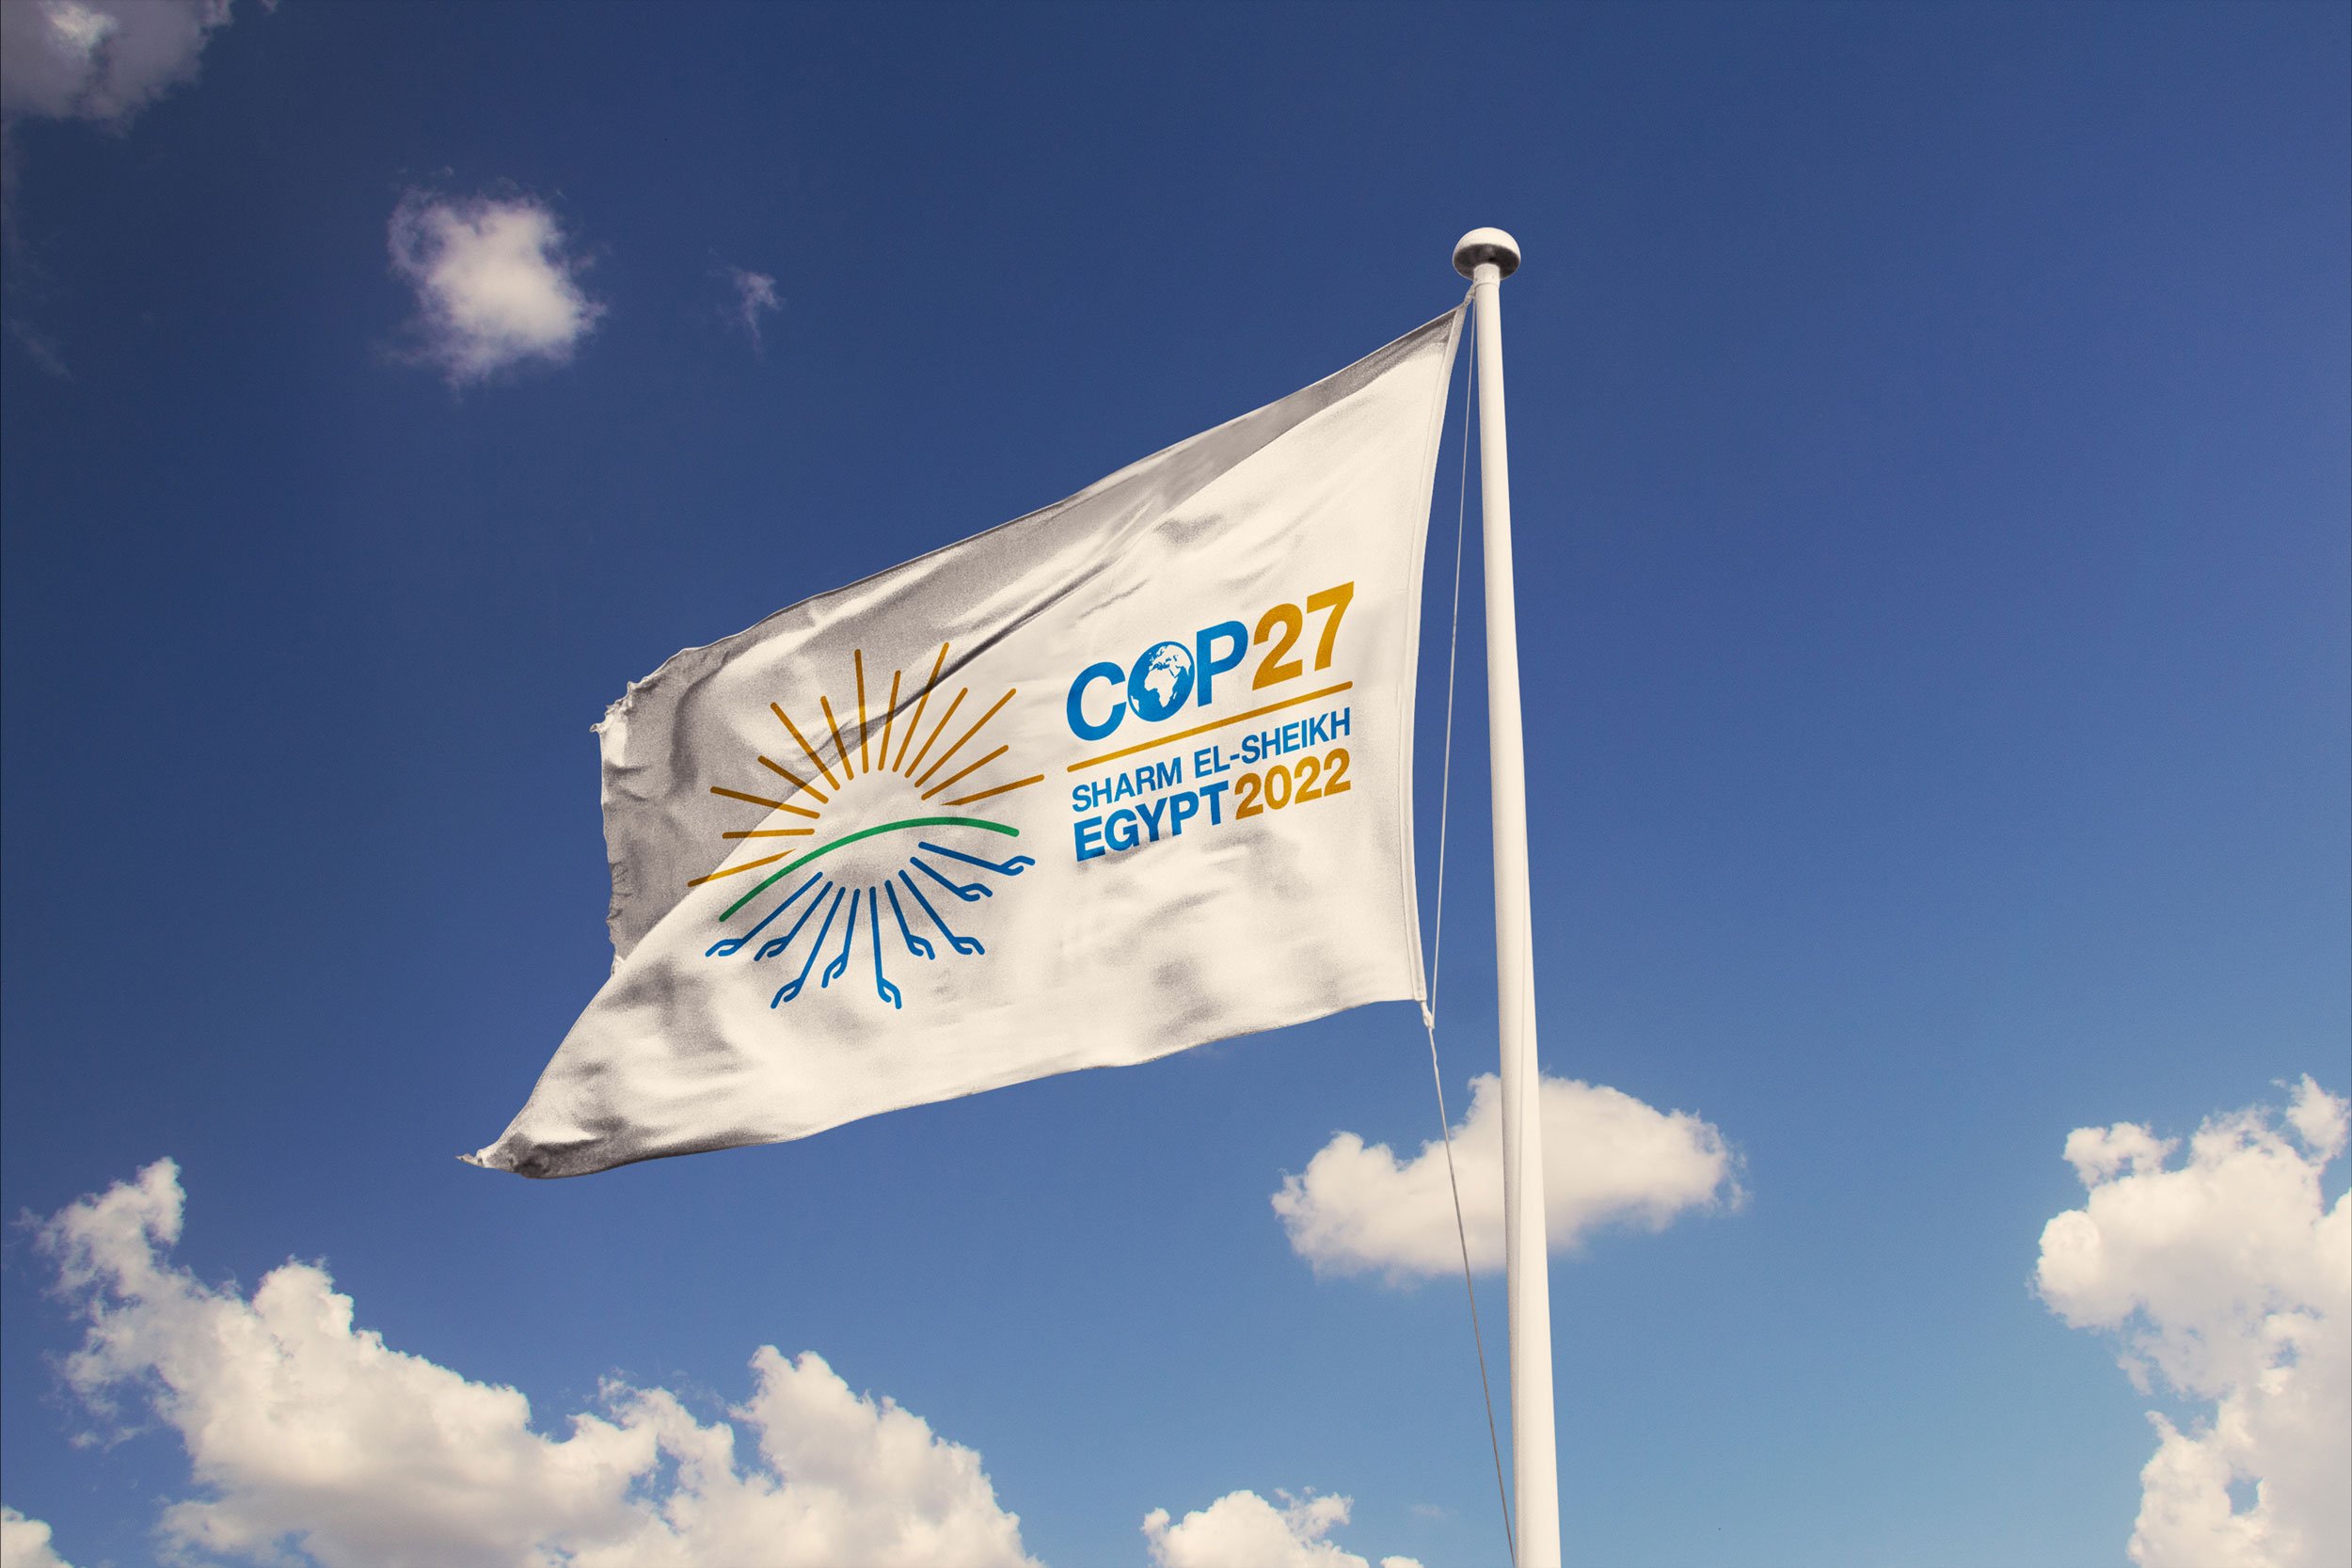 A flag with the COP27 logo waiving in front of a blue sky